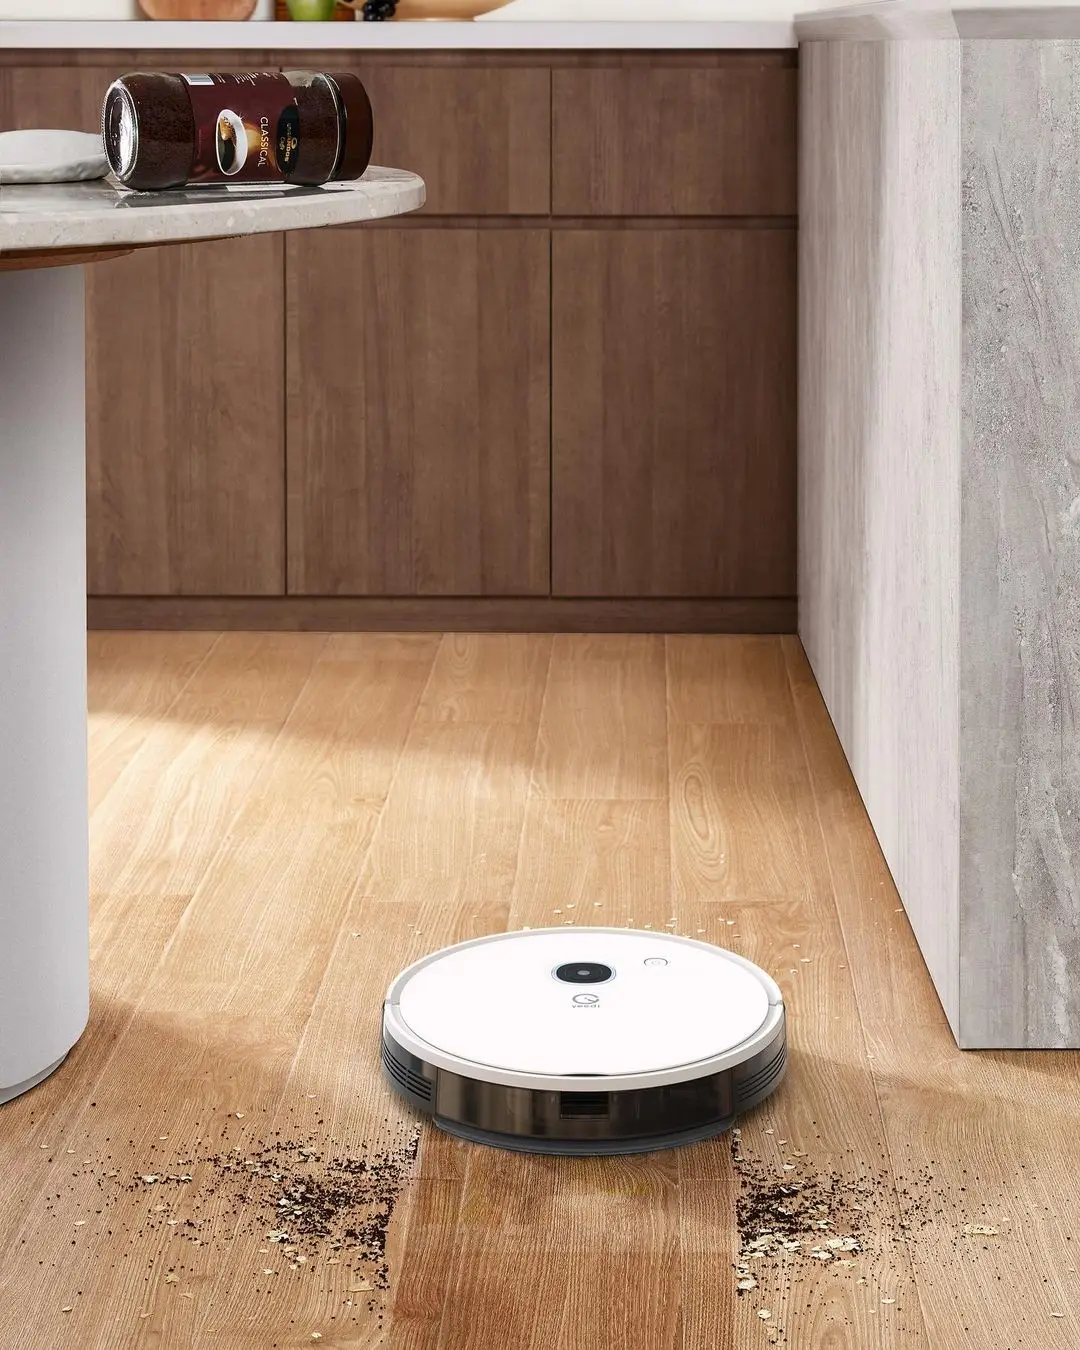 Yeedi Robot Vacuum Cleaner Review - Self-Empty Station Vacuuming  Mopping and More 